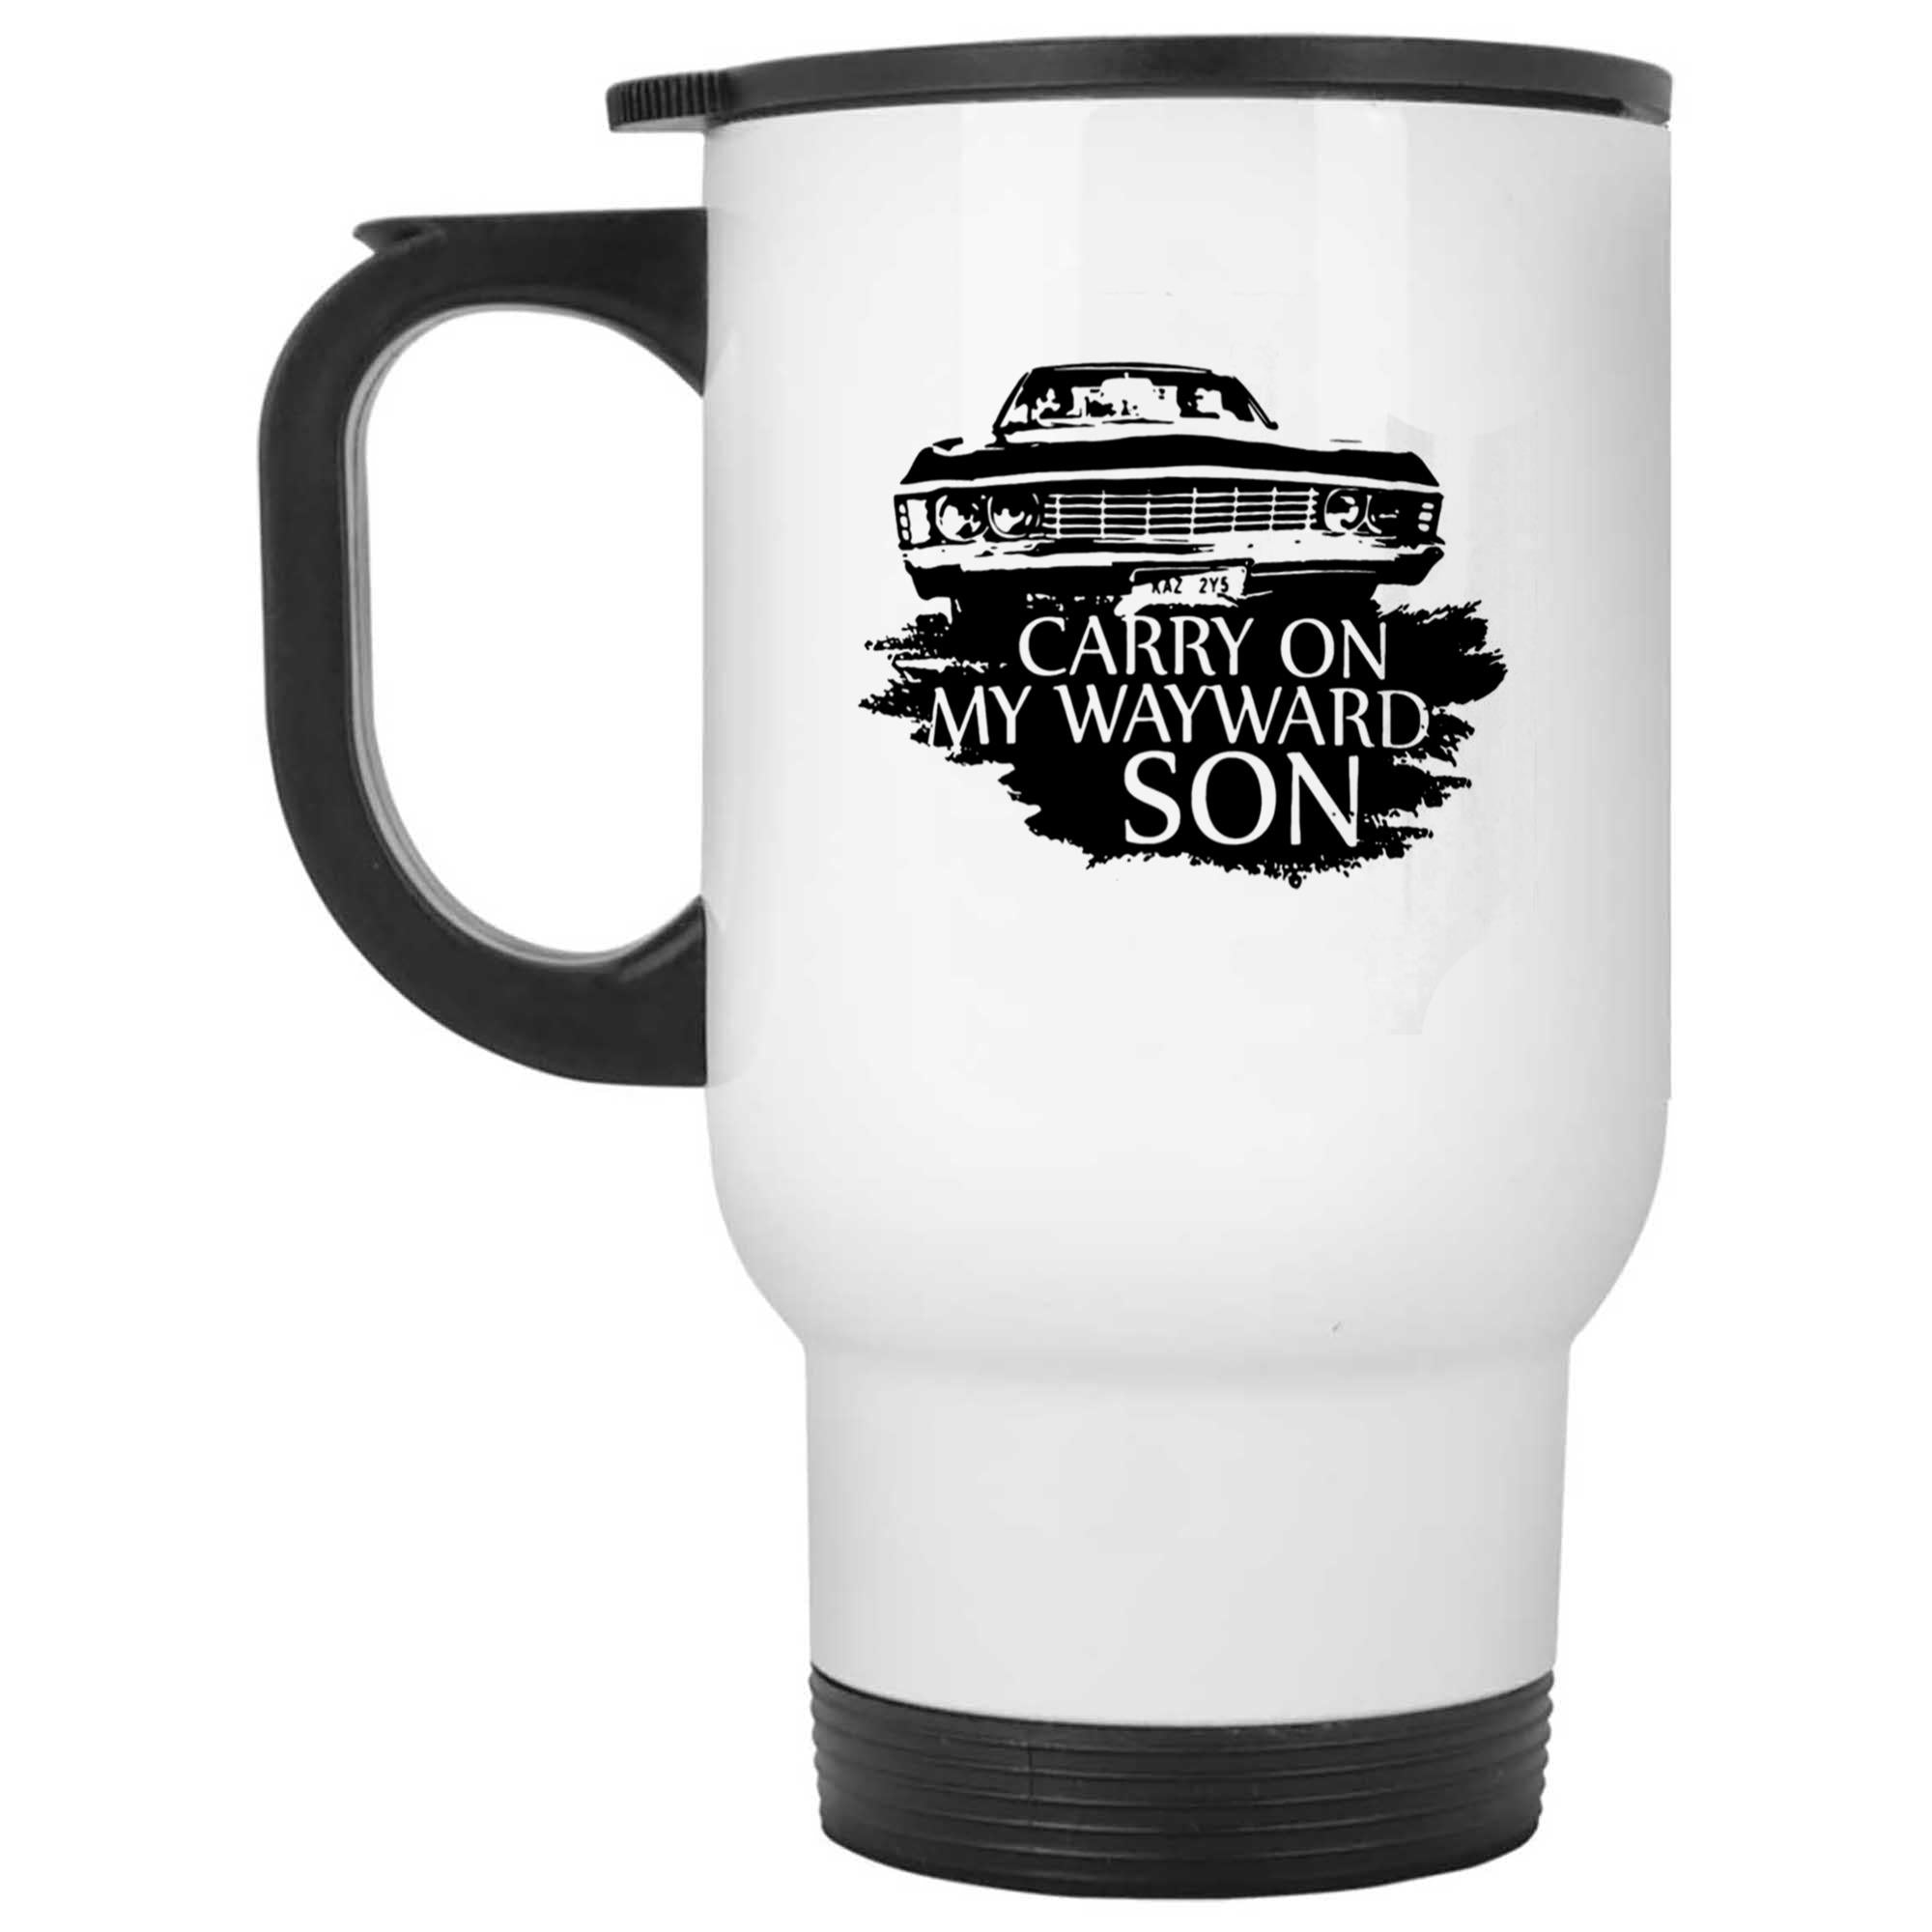 Skitongifts Funny Ceramic Novelty Coffee Mug Carry On My Wayward Son Perfect For Fan Of Sam And Dean ifvNZh5